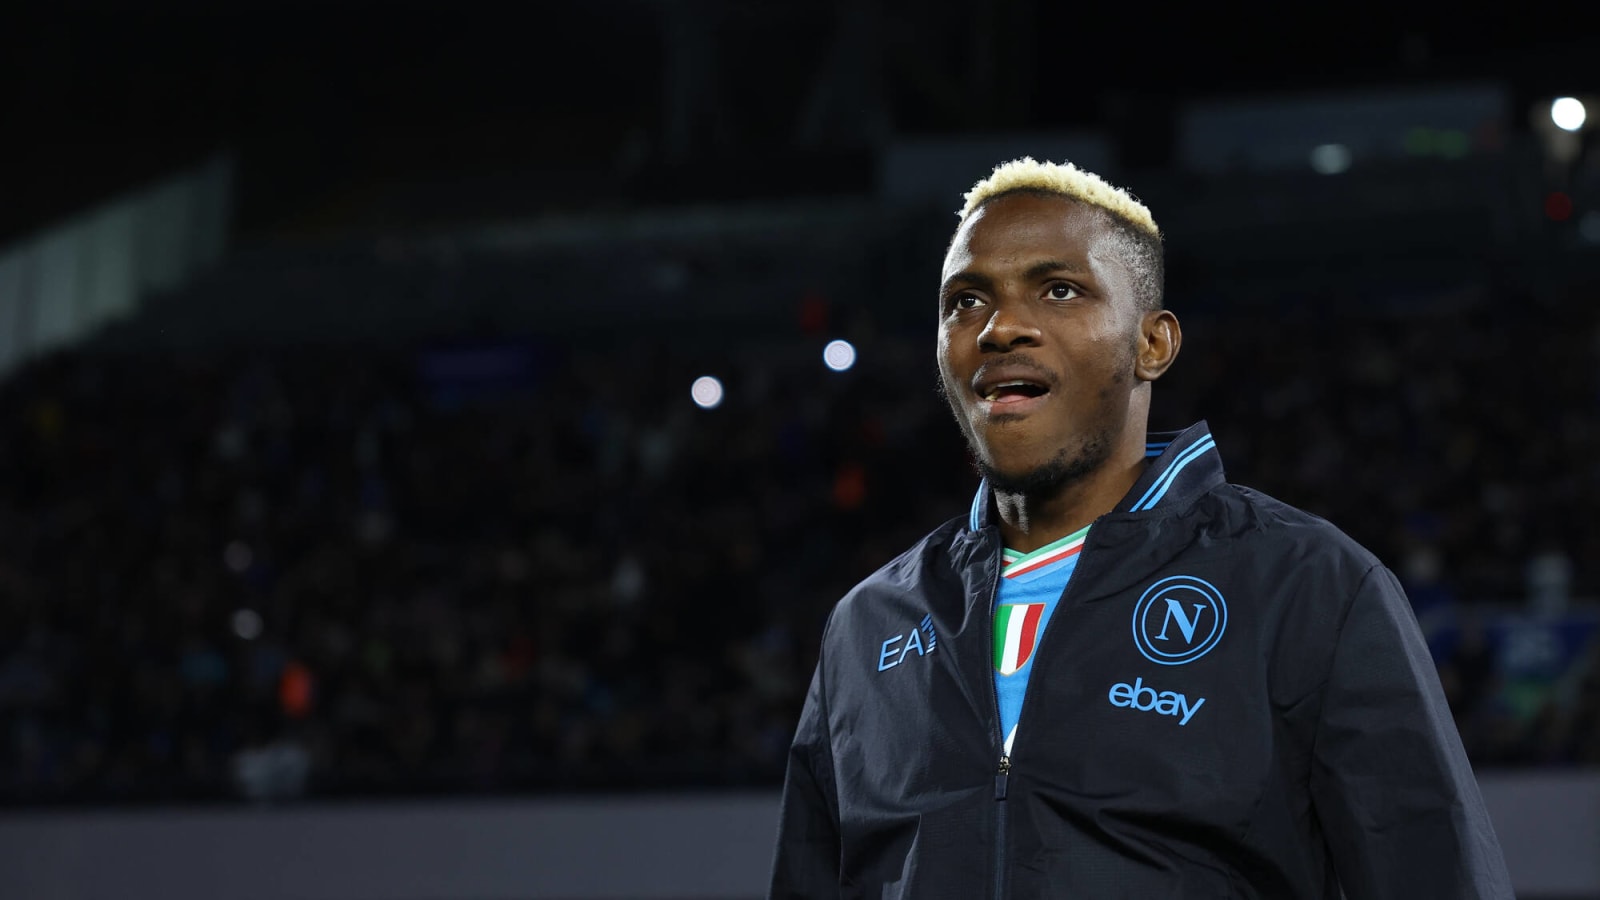  Victor Osimhen Arsenal and Chelsea transfer interest again confirmed by Fabrizio Romano